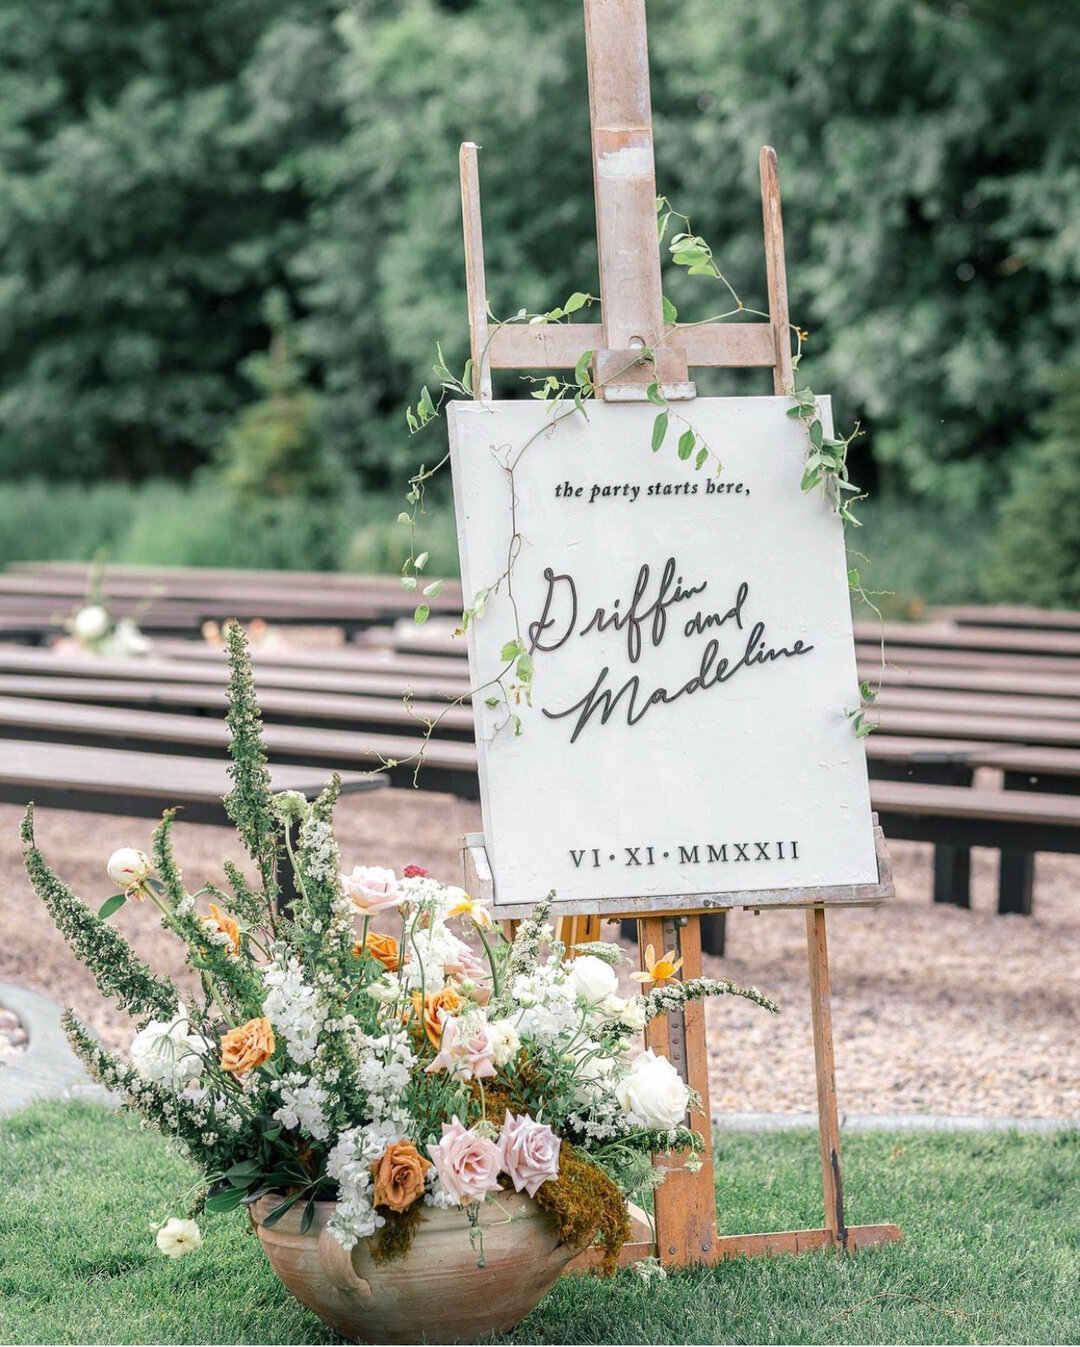 Signage at a wedding is a MUST! Not only to guide guests&hellip;..but they start off the party, reflecting your personal style as a couple.
Photographer: @twobirdsphoto 
Floral: @lovealwaysfloral 
Venue: @thepinesvenue 
Signage design: @madelineschat